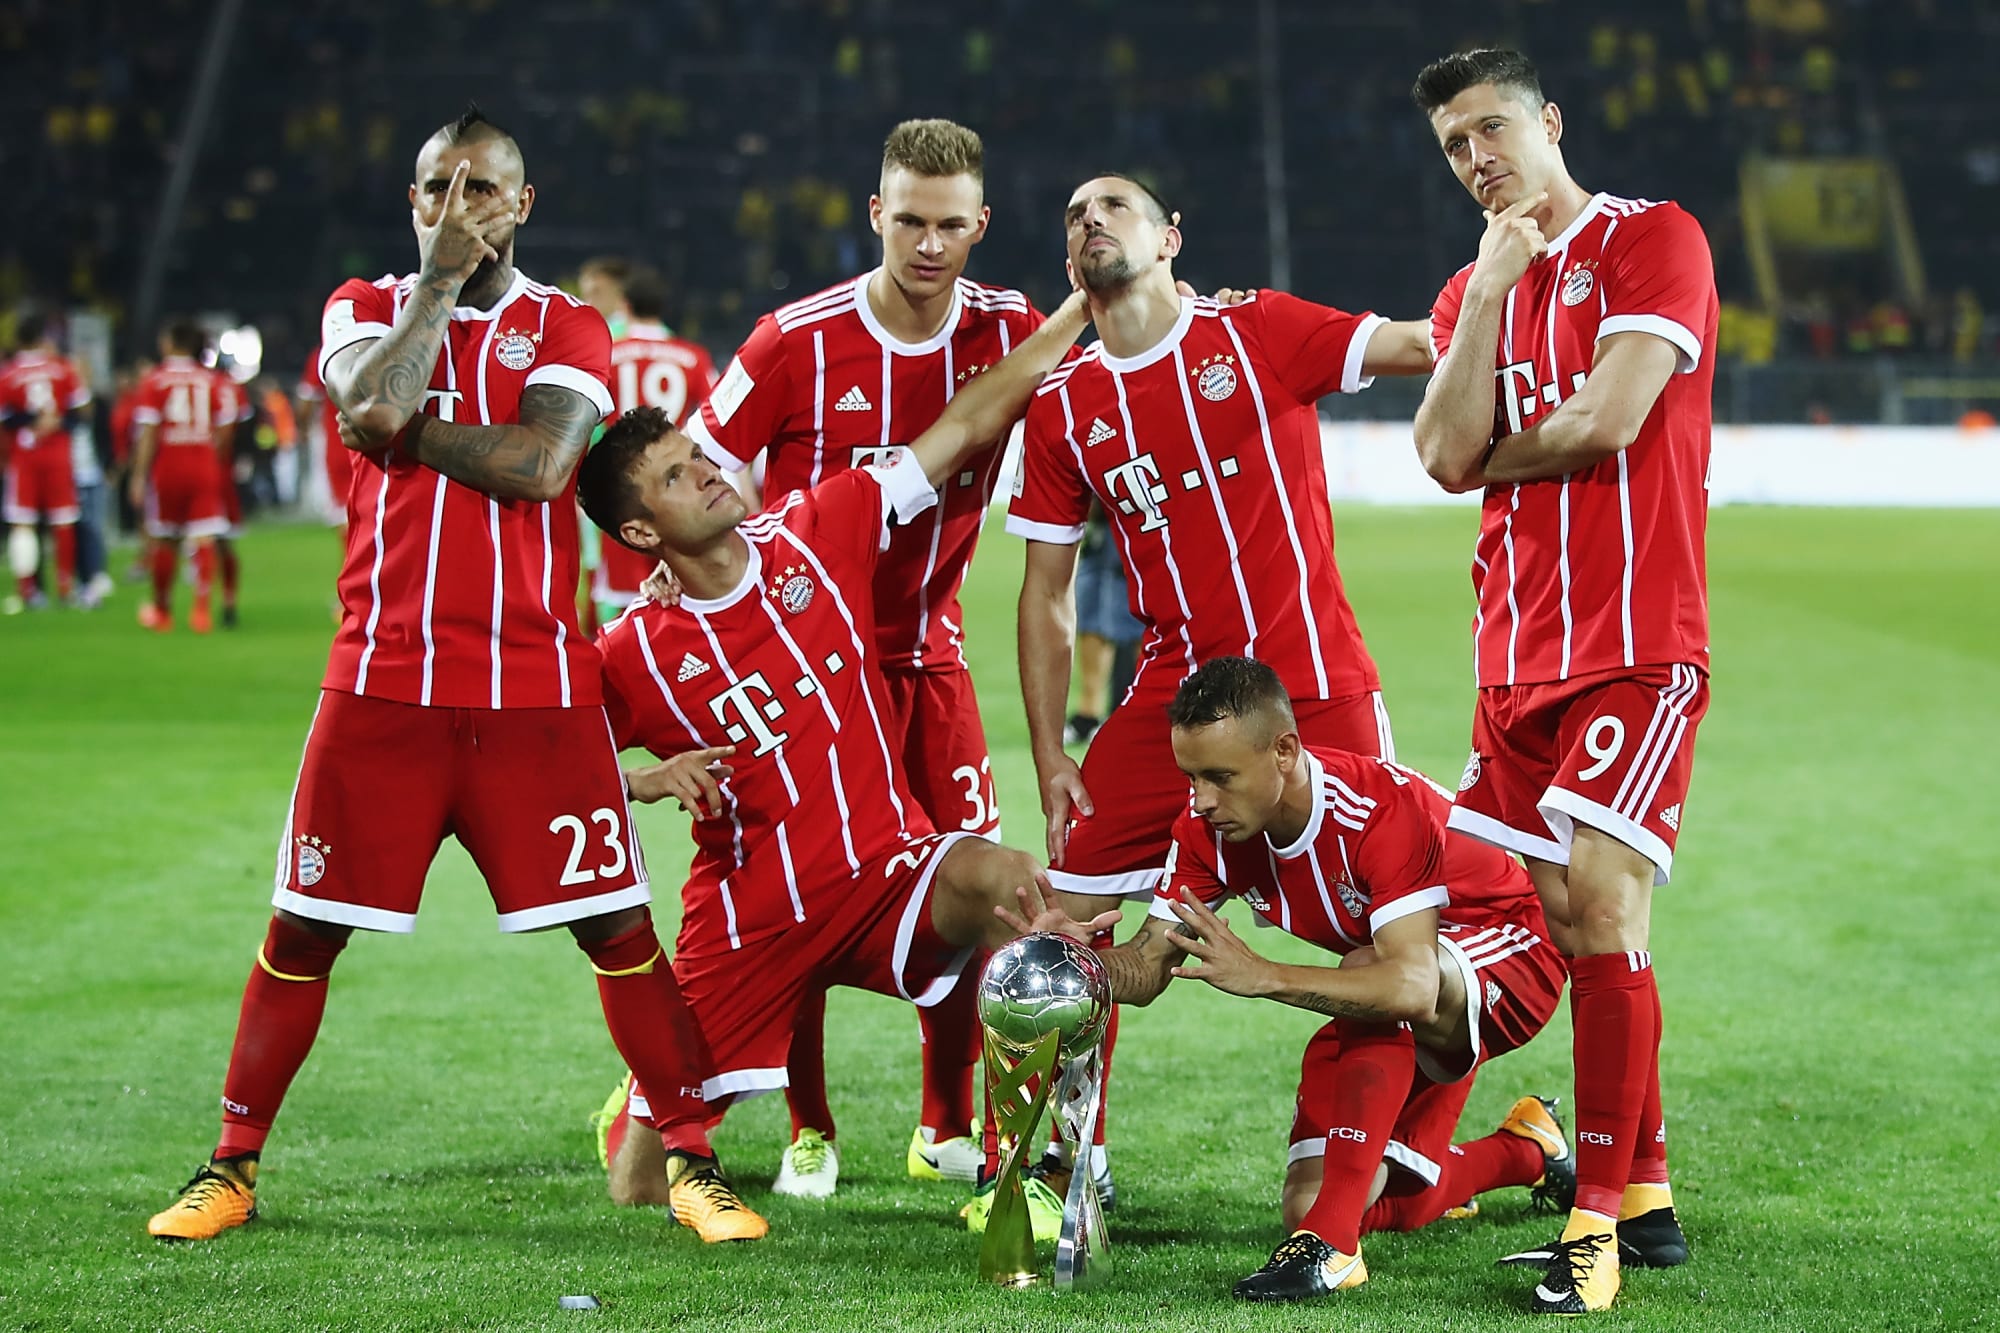 Choosing the best Bayern Munich starting XI for the rest of the season